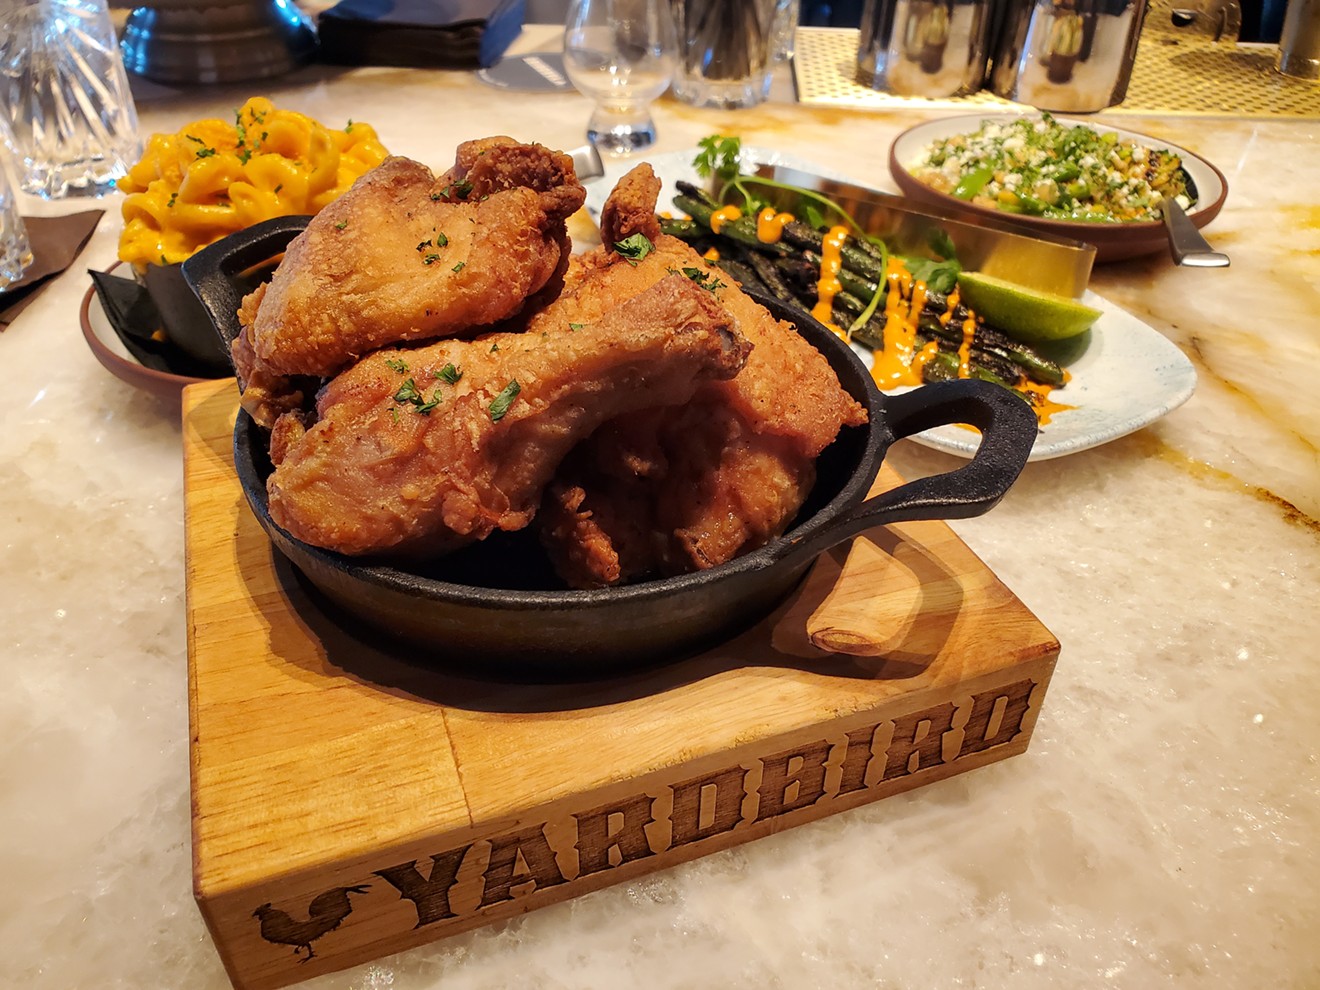 The fried chicken at Yardbird is very good, but there are more affordable options around.